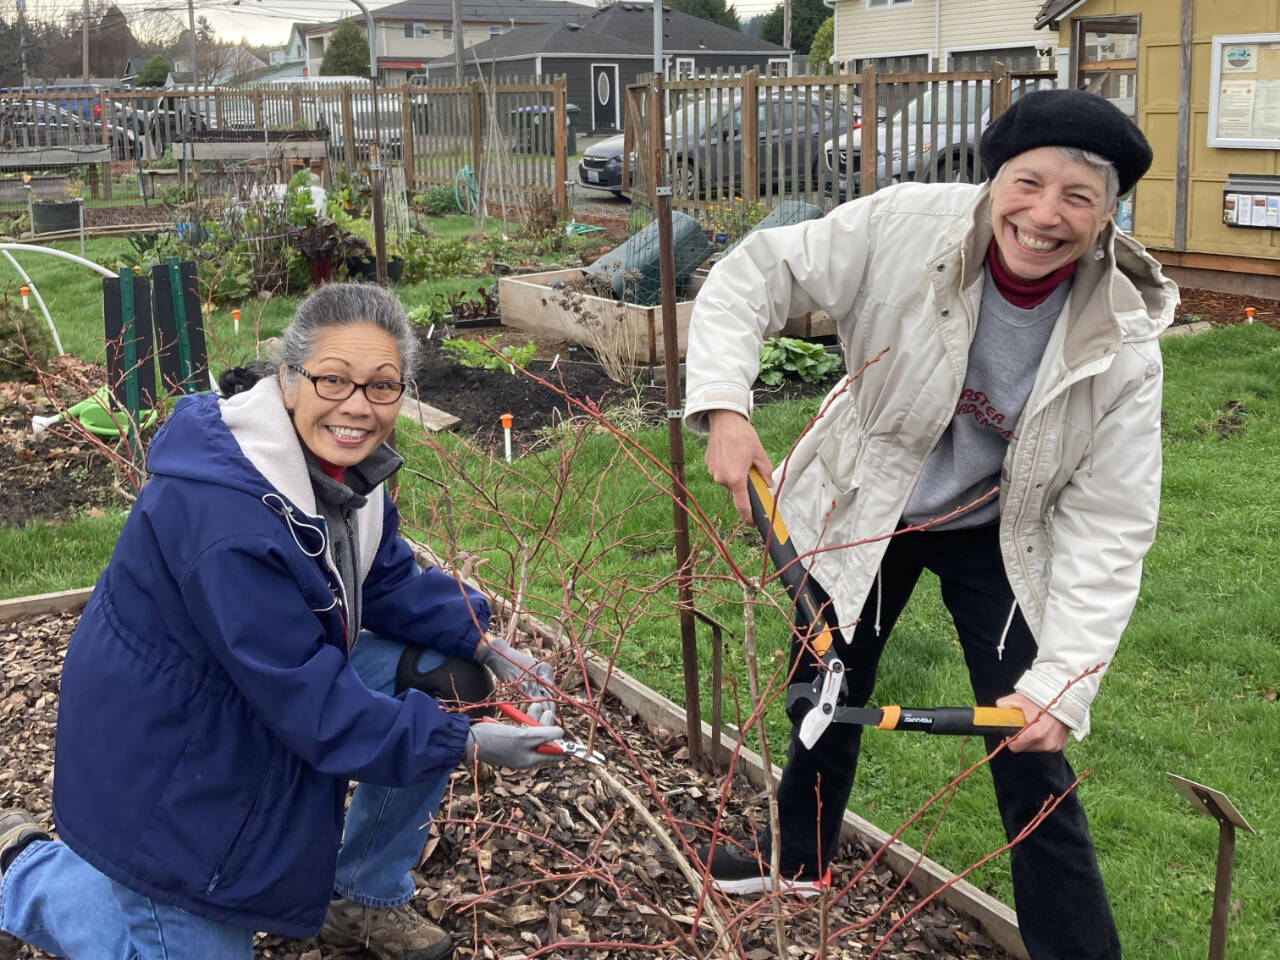 Photo by Paul Stehr-Green 
Clallam County Master Gardners Audreen Williams, left, and Jeanette Stehr-Green host two sessions of “Blueberries: Pruning for Productivity” on Feb. 10, at the Fifth Street Community Garden and Feb. 24 at Lazy J Farm.